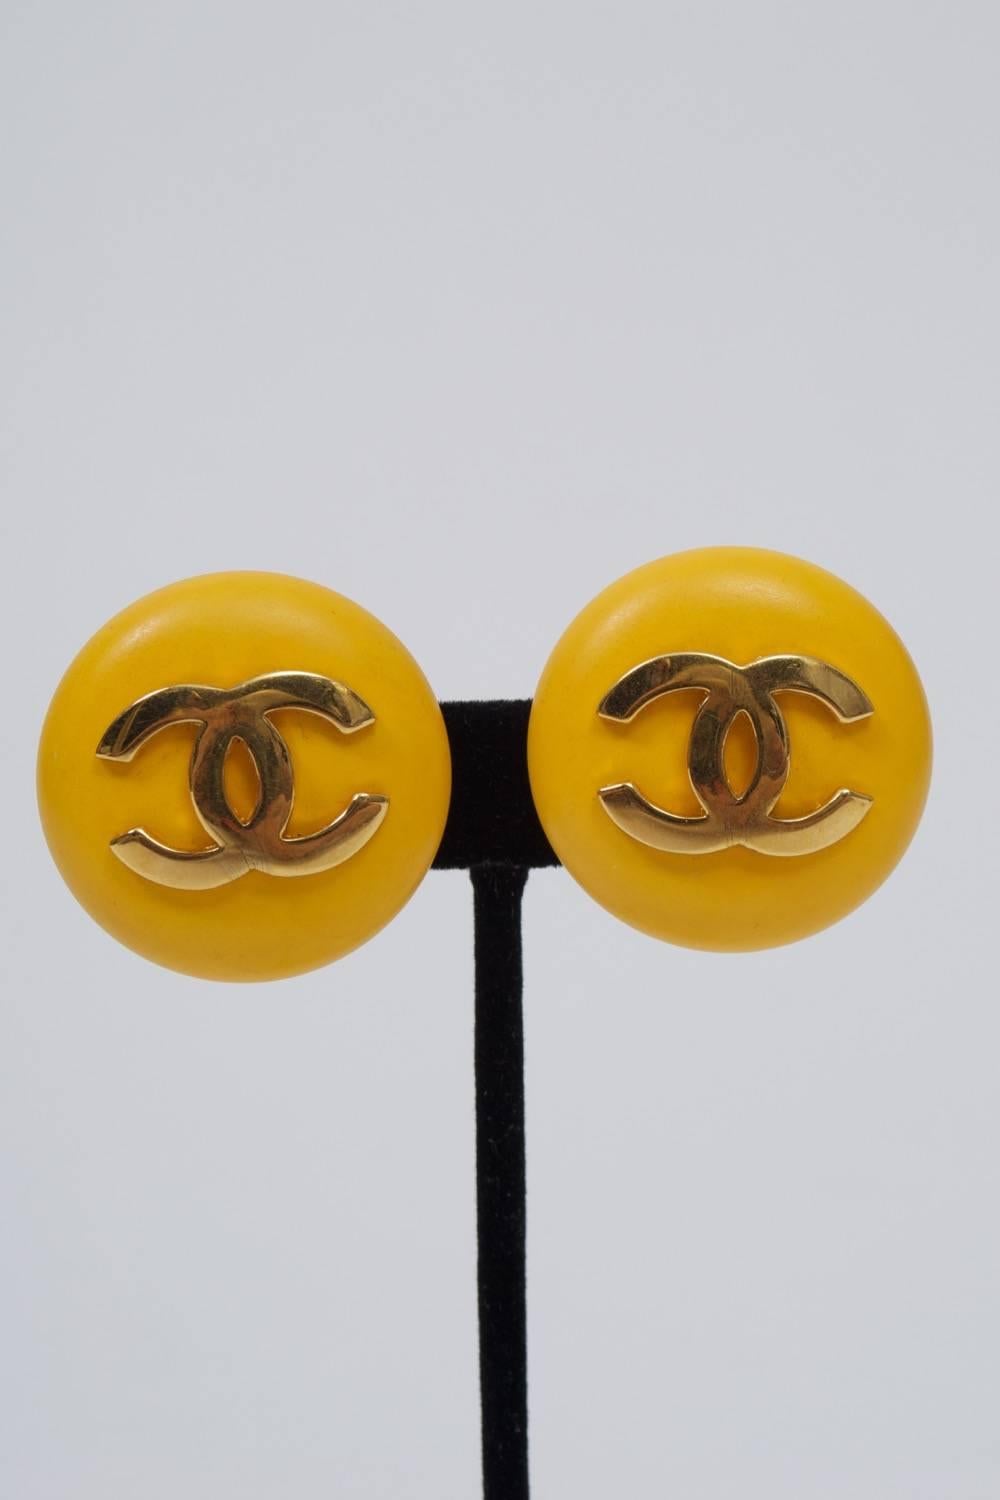 Classic Chanel button earrings in yellow plastic or resin with double-C logo in gold metal. Clip backs with oval identity plaque dating design to 1987.